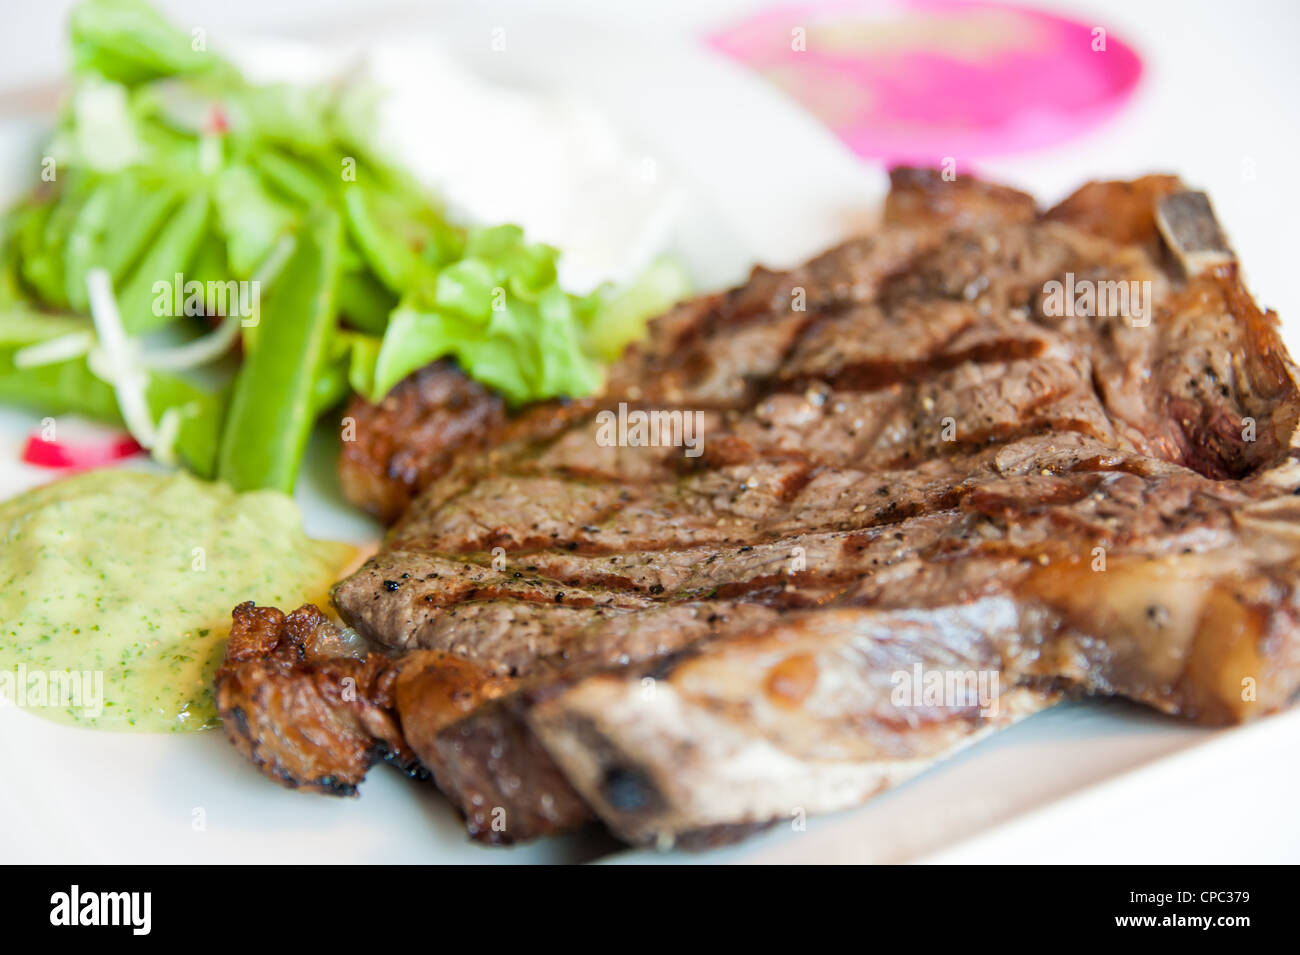 Steak with marks on a white plate with some sallad Stock Photo